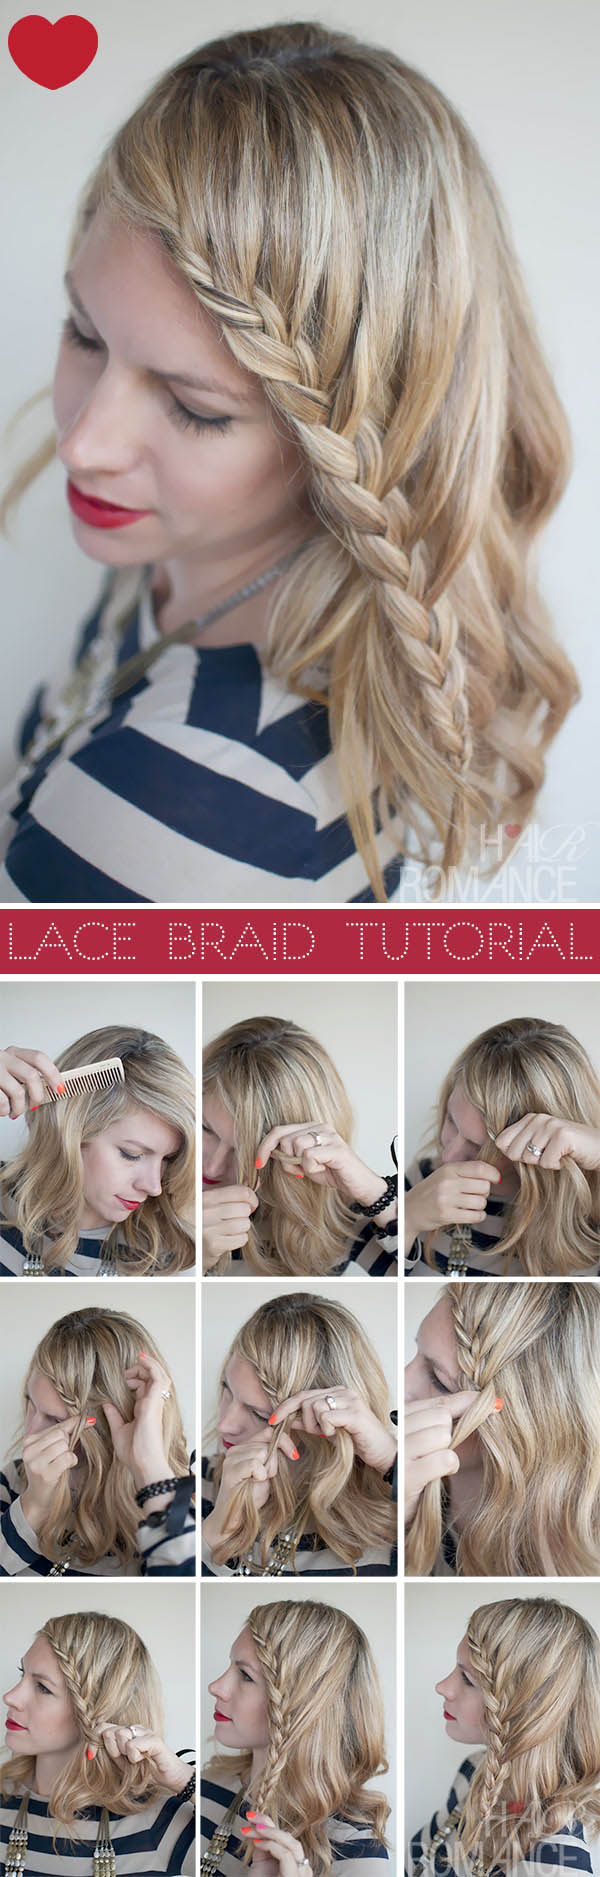 Lace Braid Hairstyle Tutorial